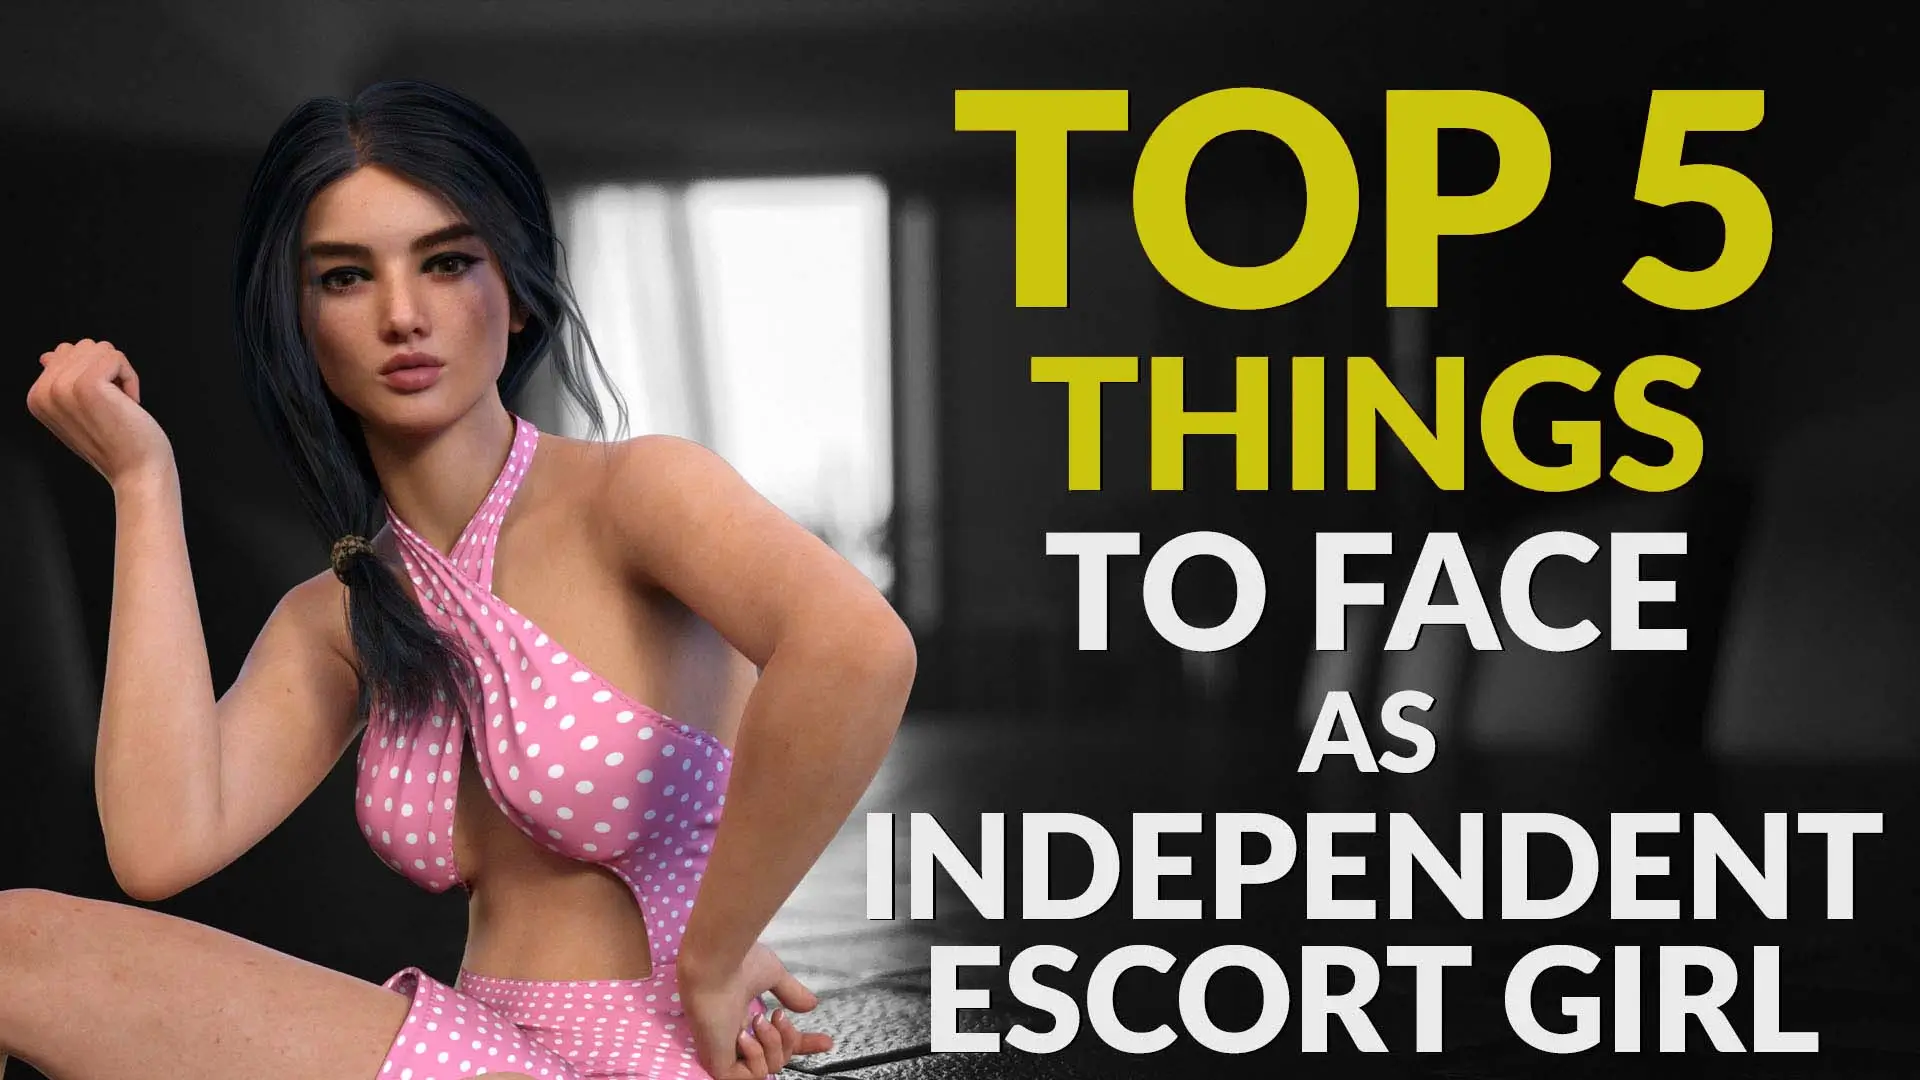 Top 5 things to face as independent